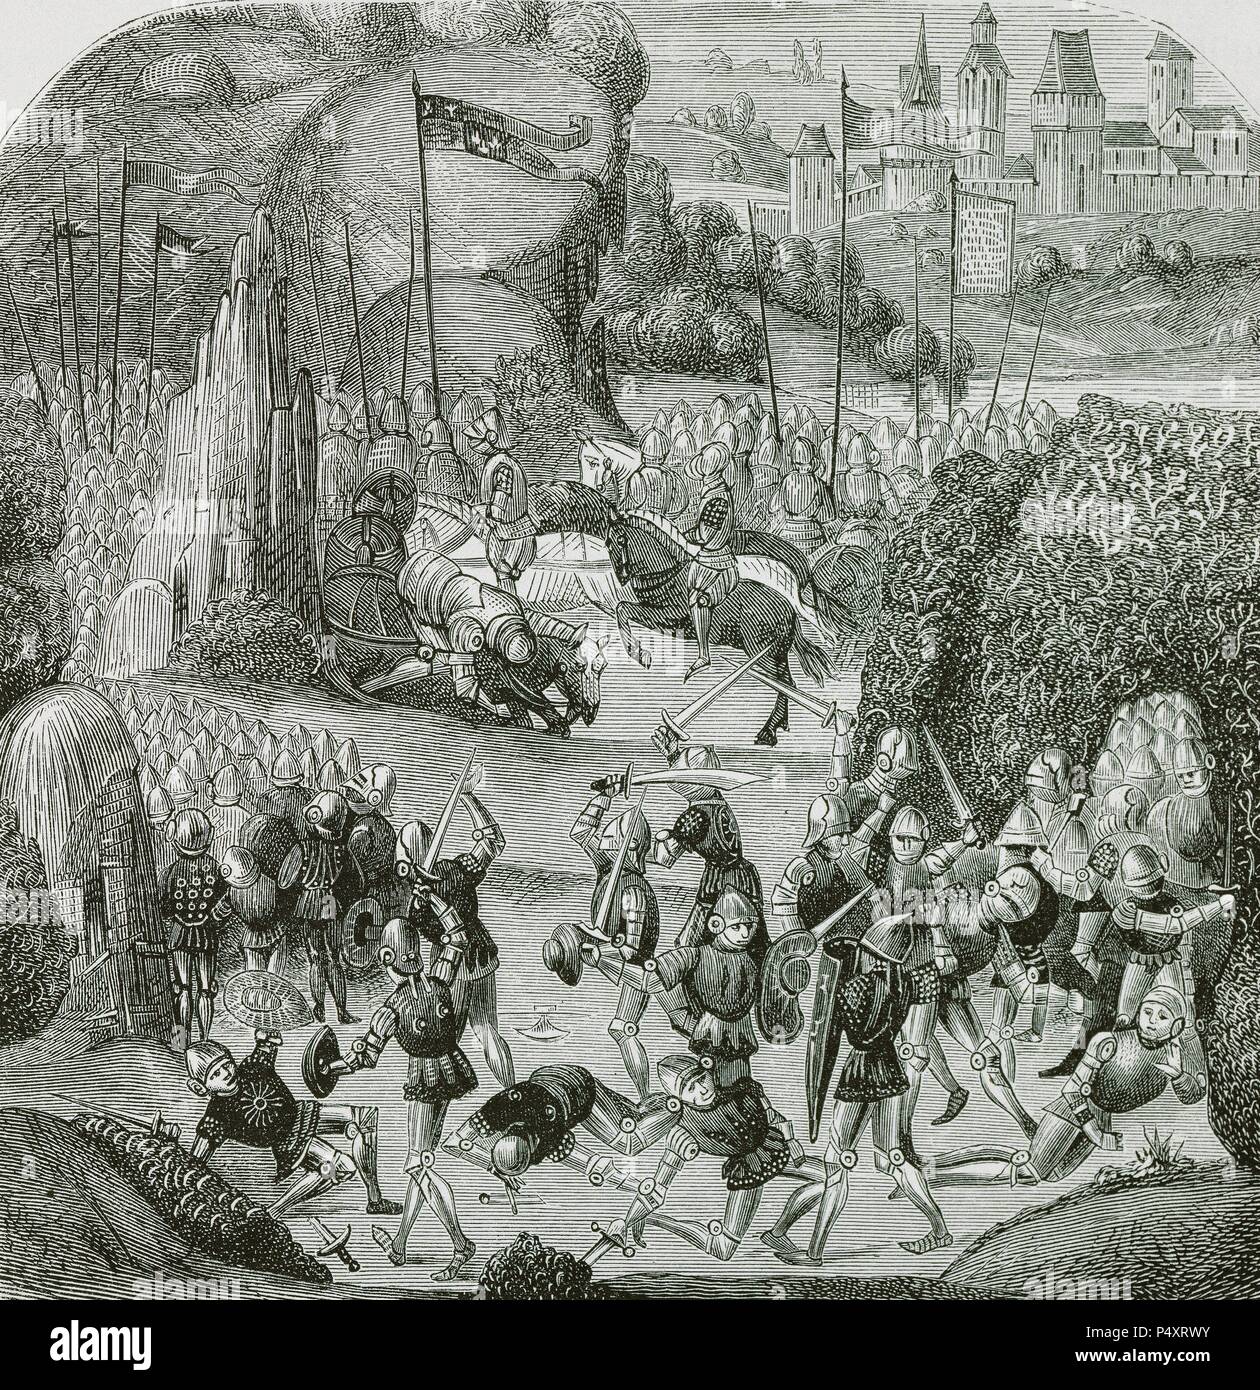 Battle of Otterburn. August 5, 1388. Fight on the border between the Scottish and English armies. Les Chroniques of Jean Froissart. Engraving of an edition of 1881. Stock Photo